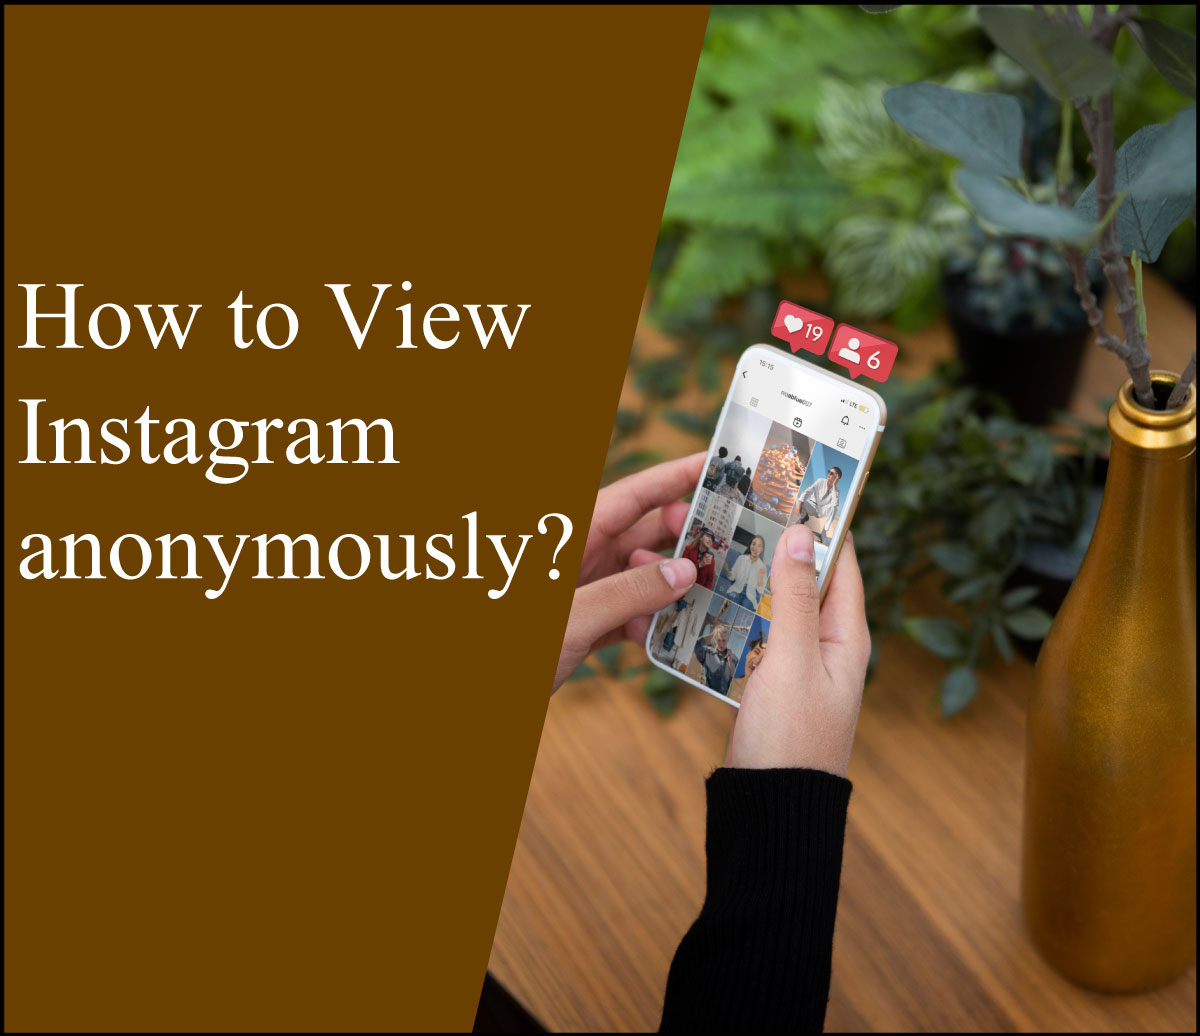 How to View Instagram anonymously?